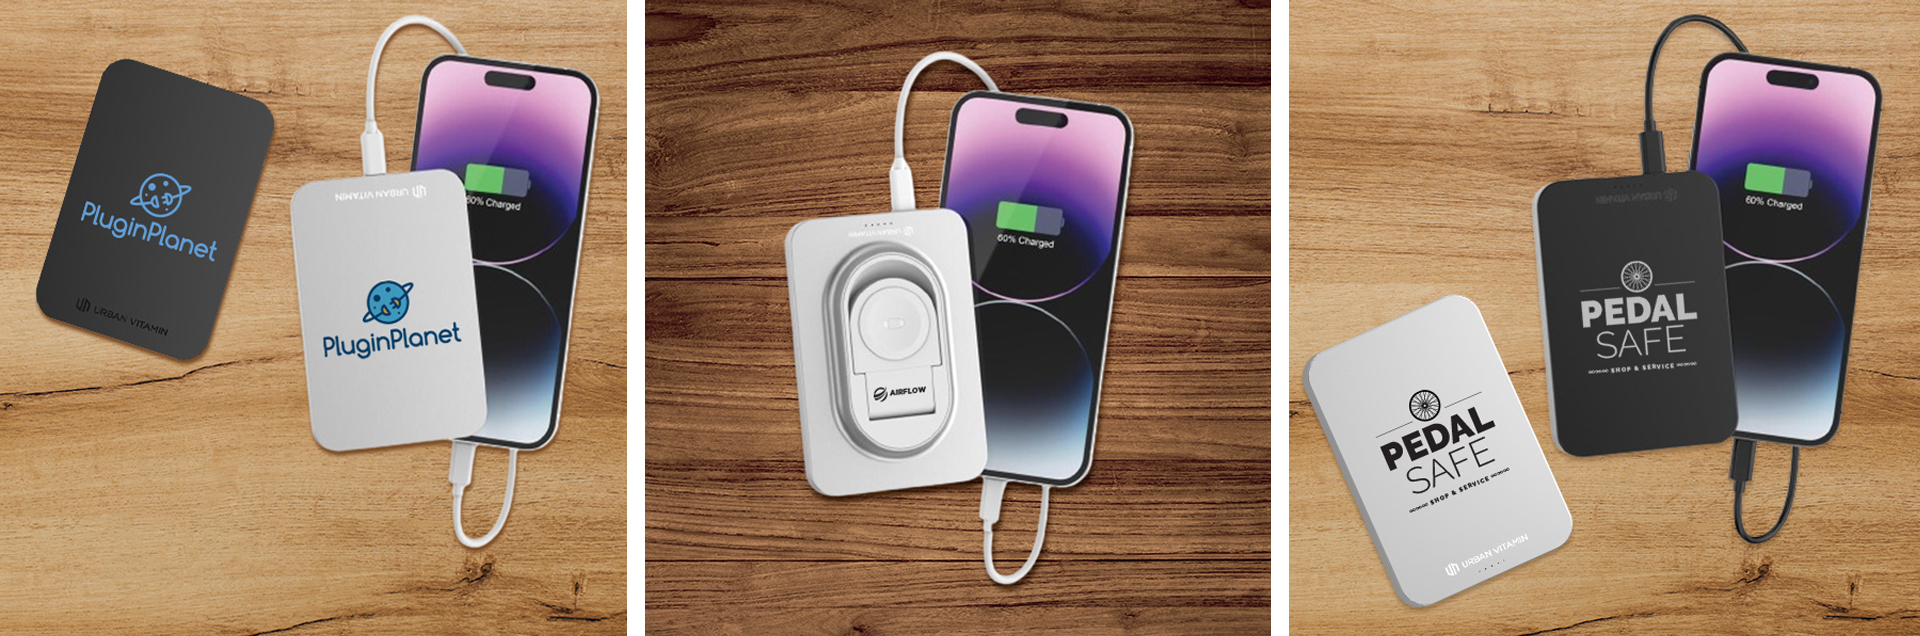 Whether you're seeking a reliable energy boost for your daily commute, outdoor escapades, or as a safety net for emergencies, the Urban Vitamin powerbanks ensure you stay charged and connected with confidence.